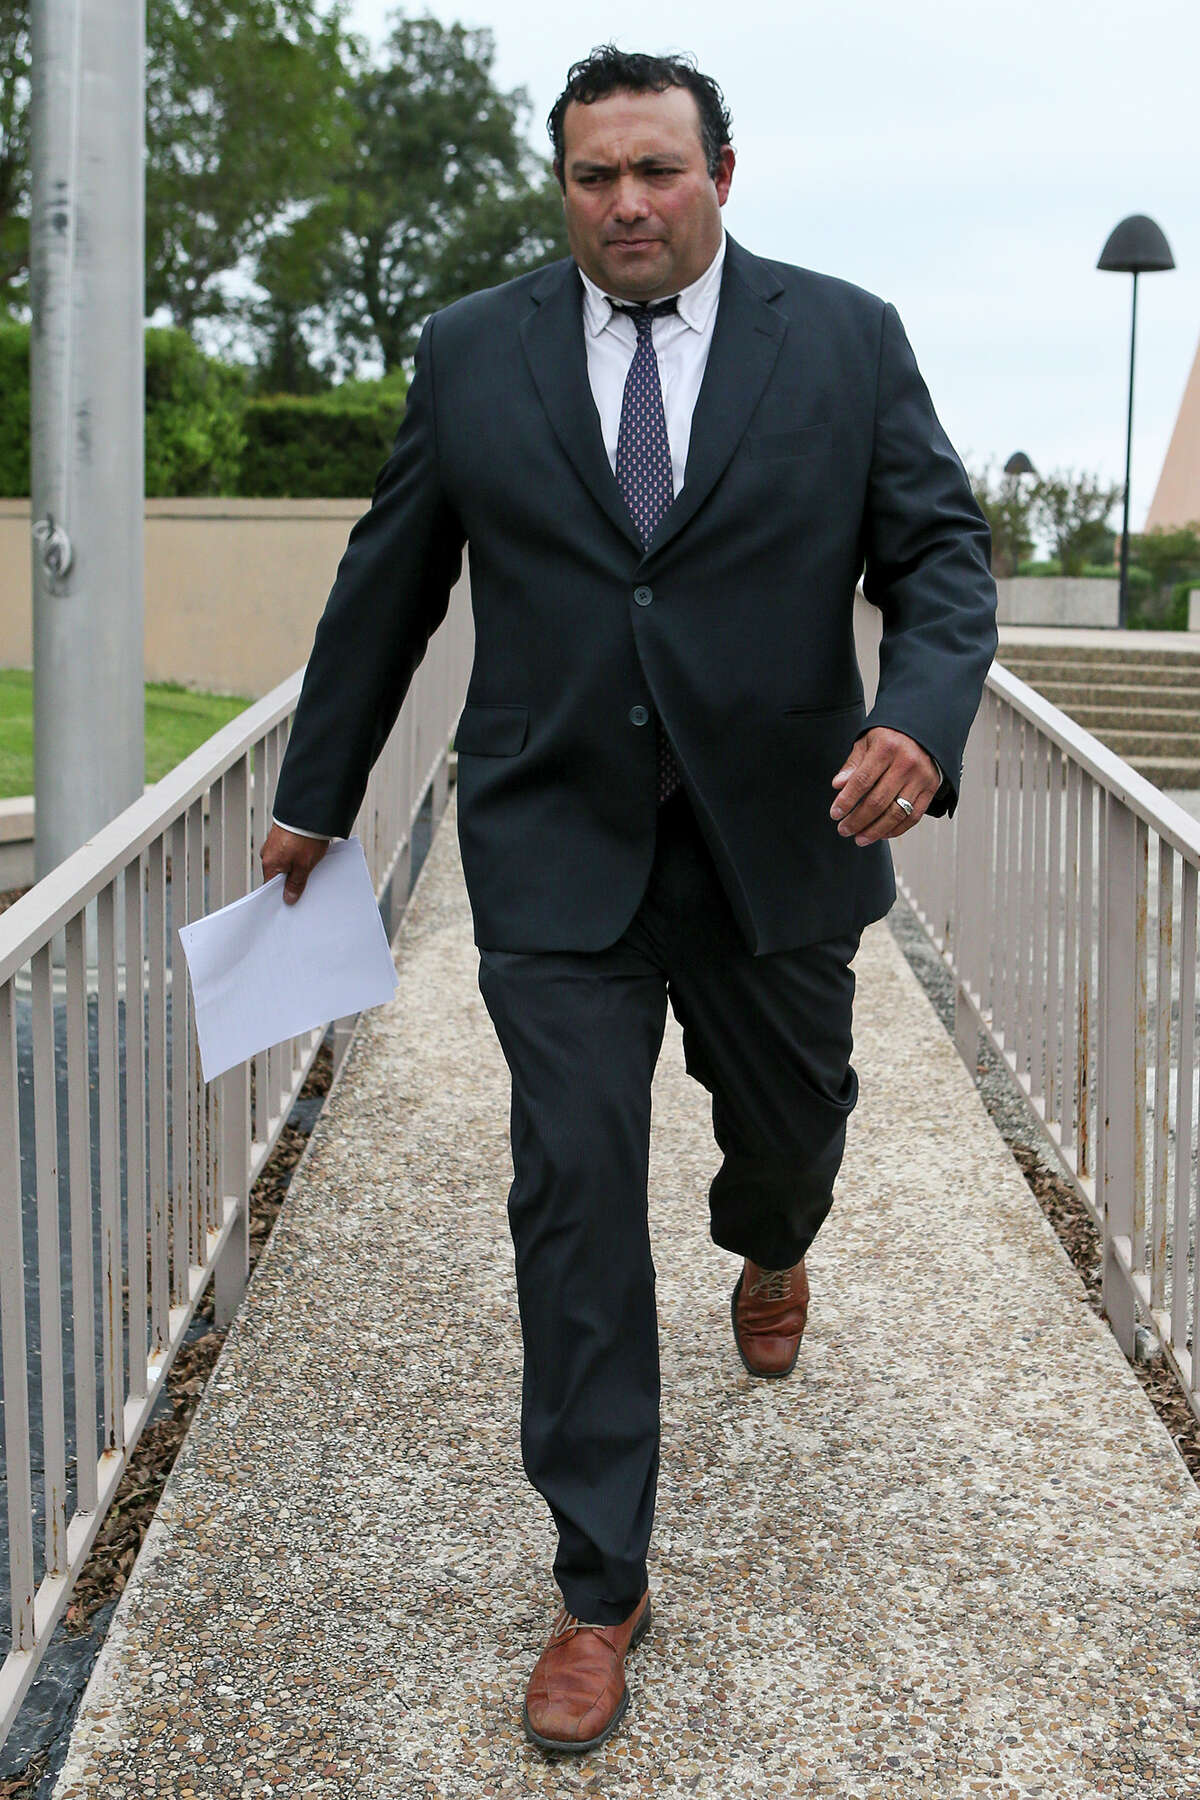 Former Harlandale ISD board trustee Joshua Cerna leaves the Federal Courthouse on Tuesday, Sept. 27, 2016, after pleading guilty to a fraud conspiracy charge as part of an FBI corruption investigation. MARVIN PFEIFFER/ mpfeiffer@express-news.net